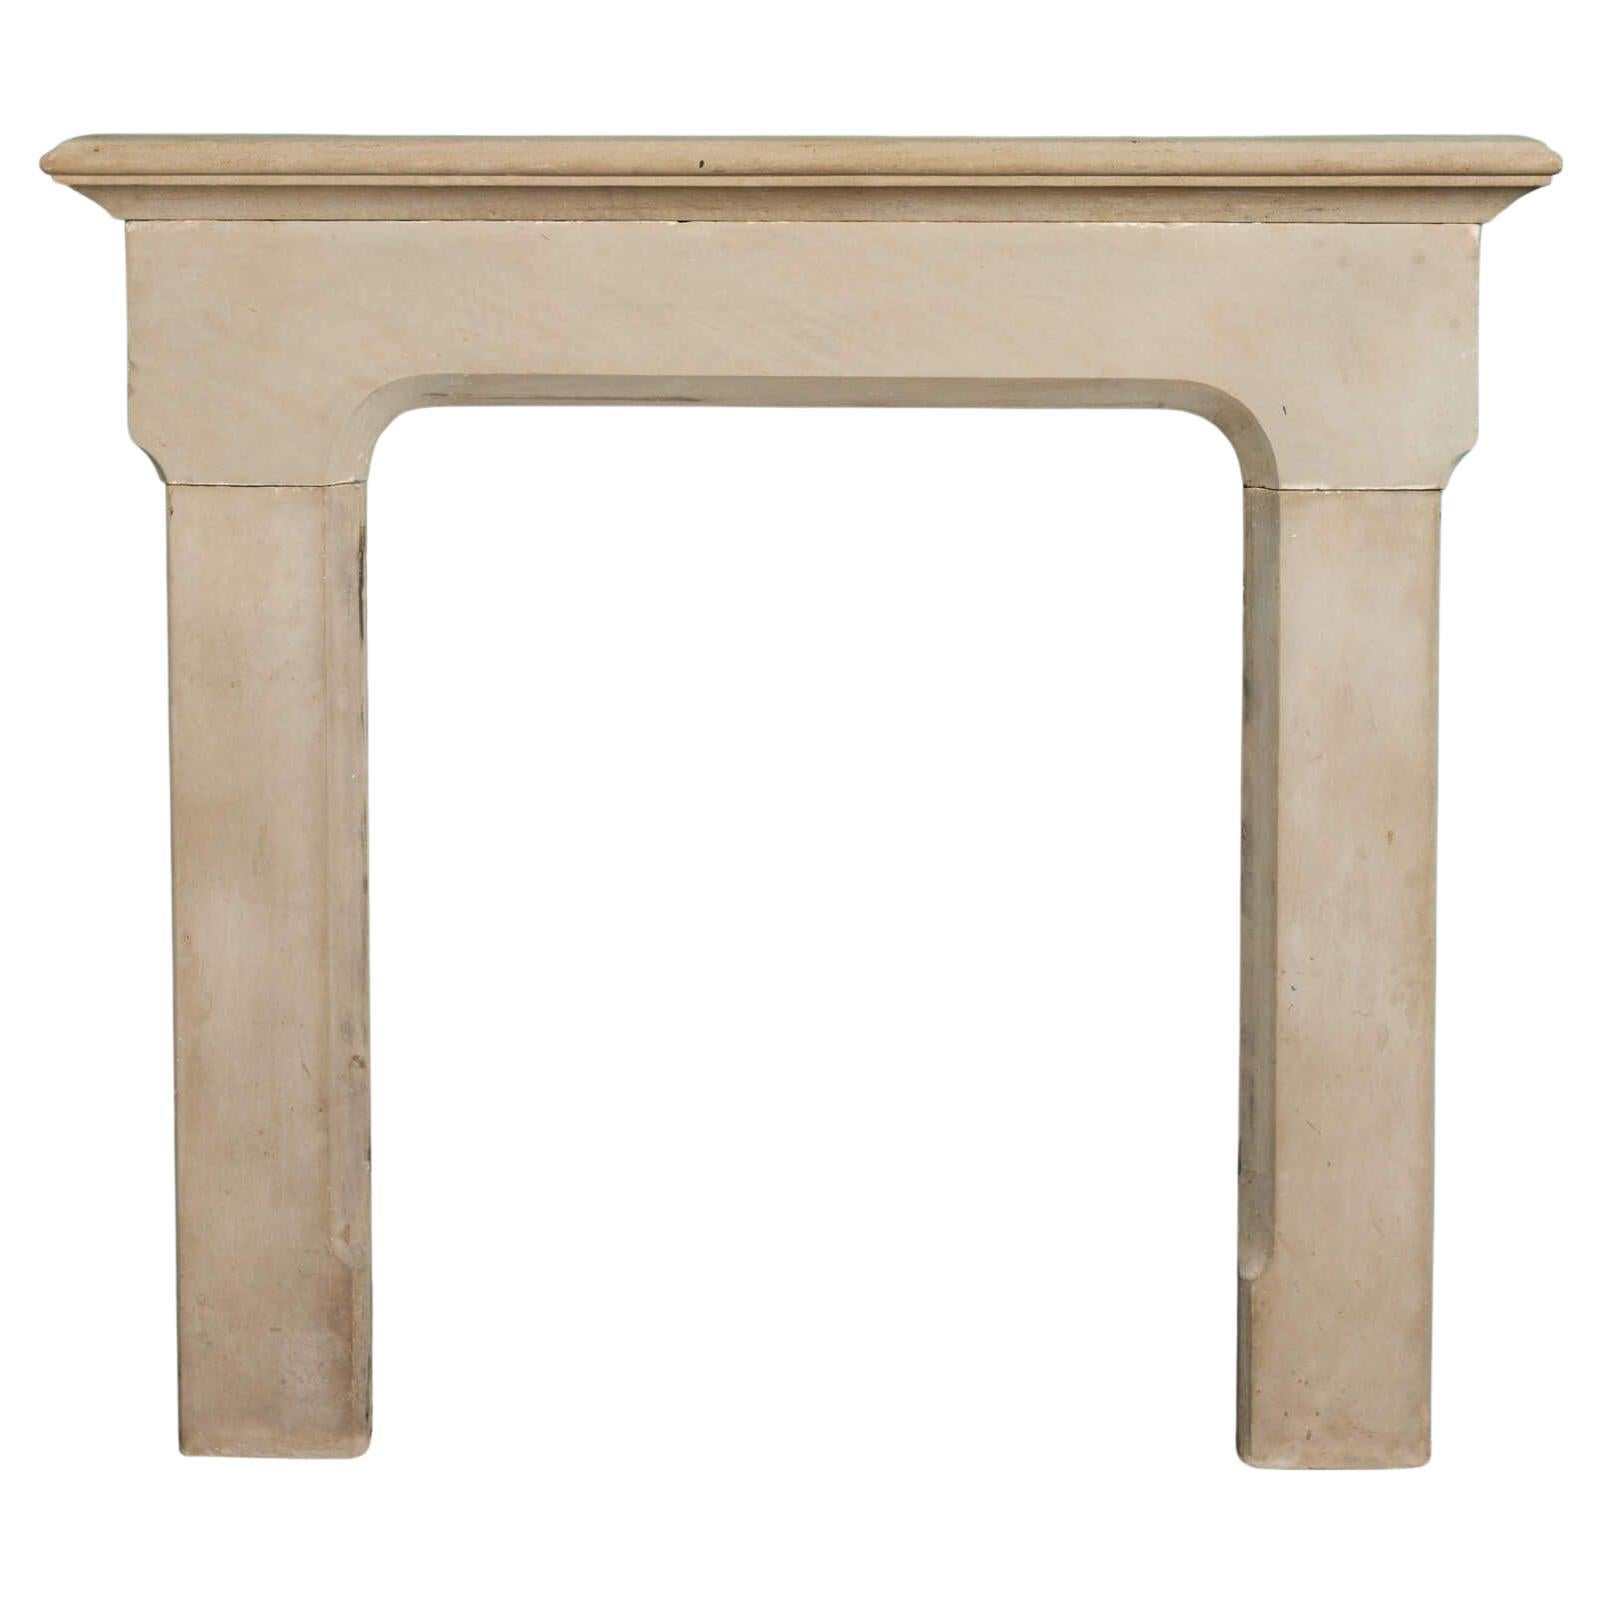 Antique York Stone Fire Surround For Sale